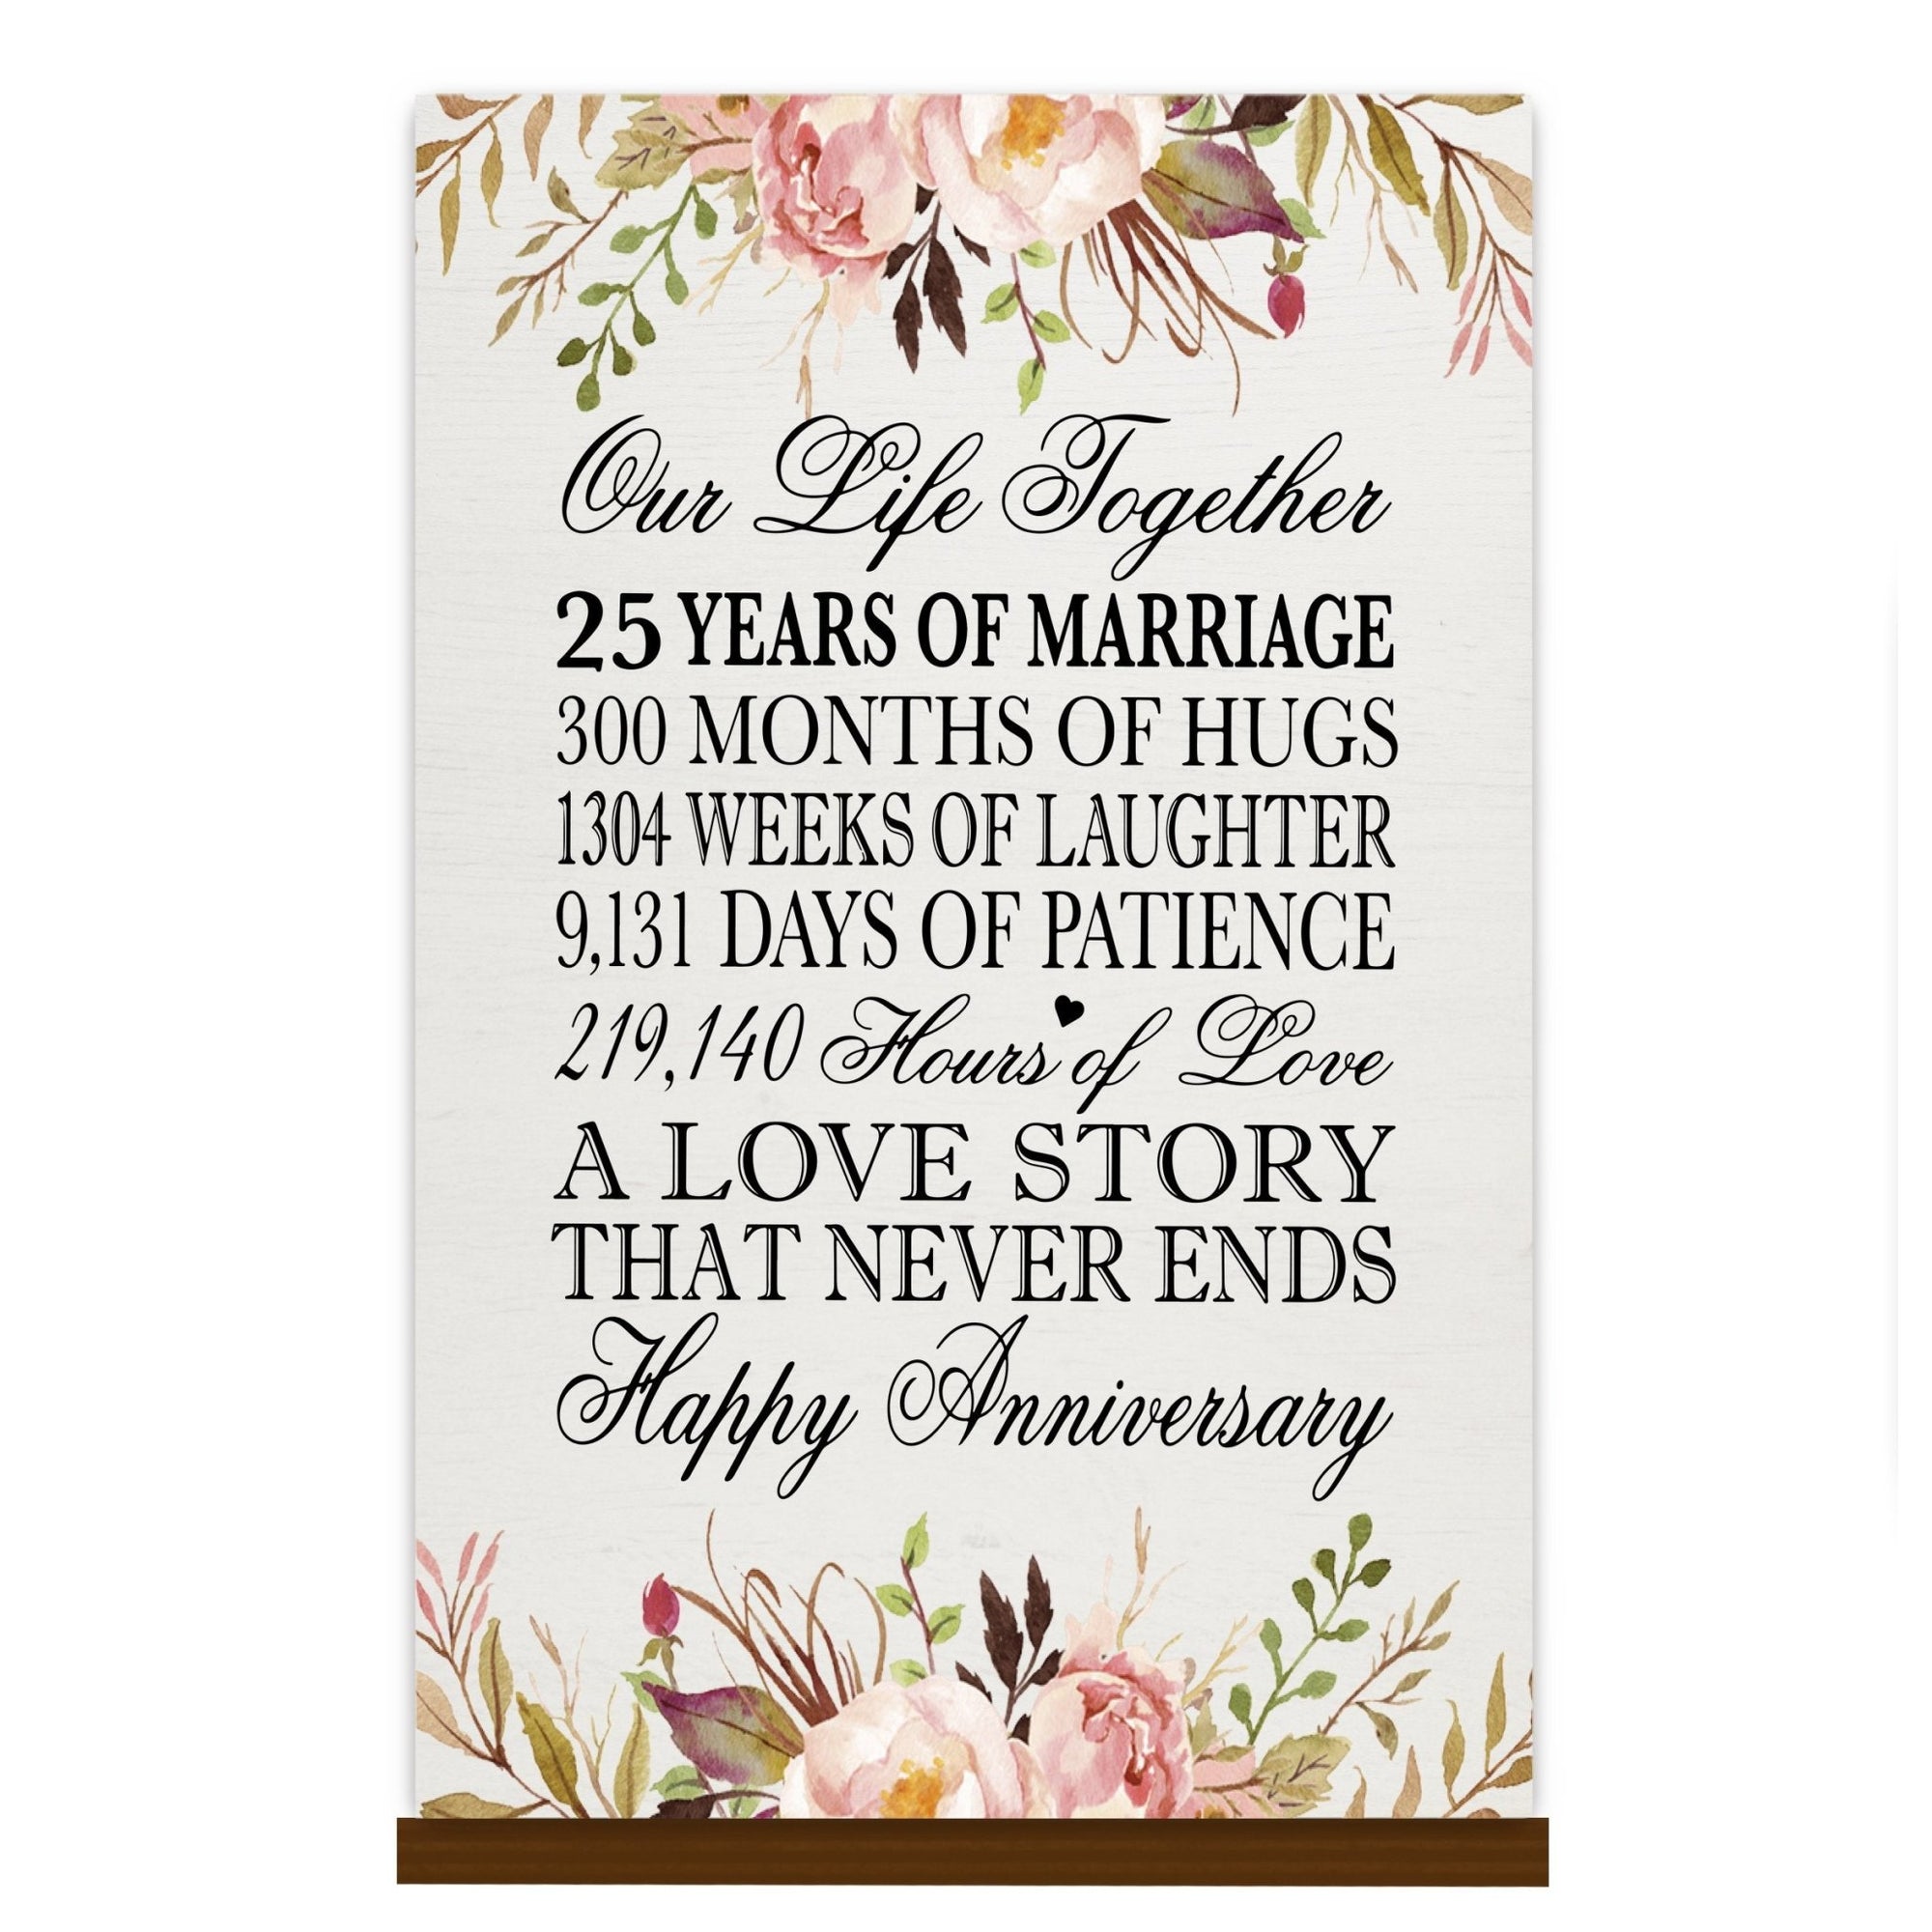 LifeSong Milestones 25th Anniversary Wall Plaque for Couples